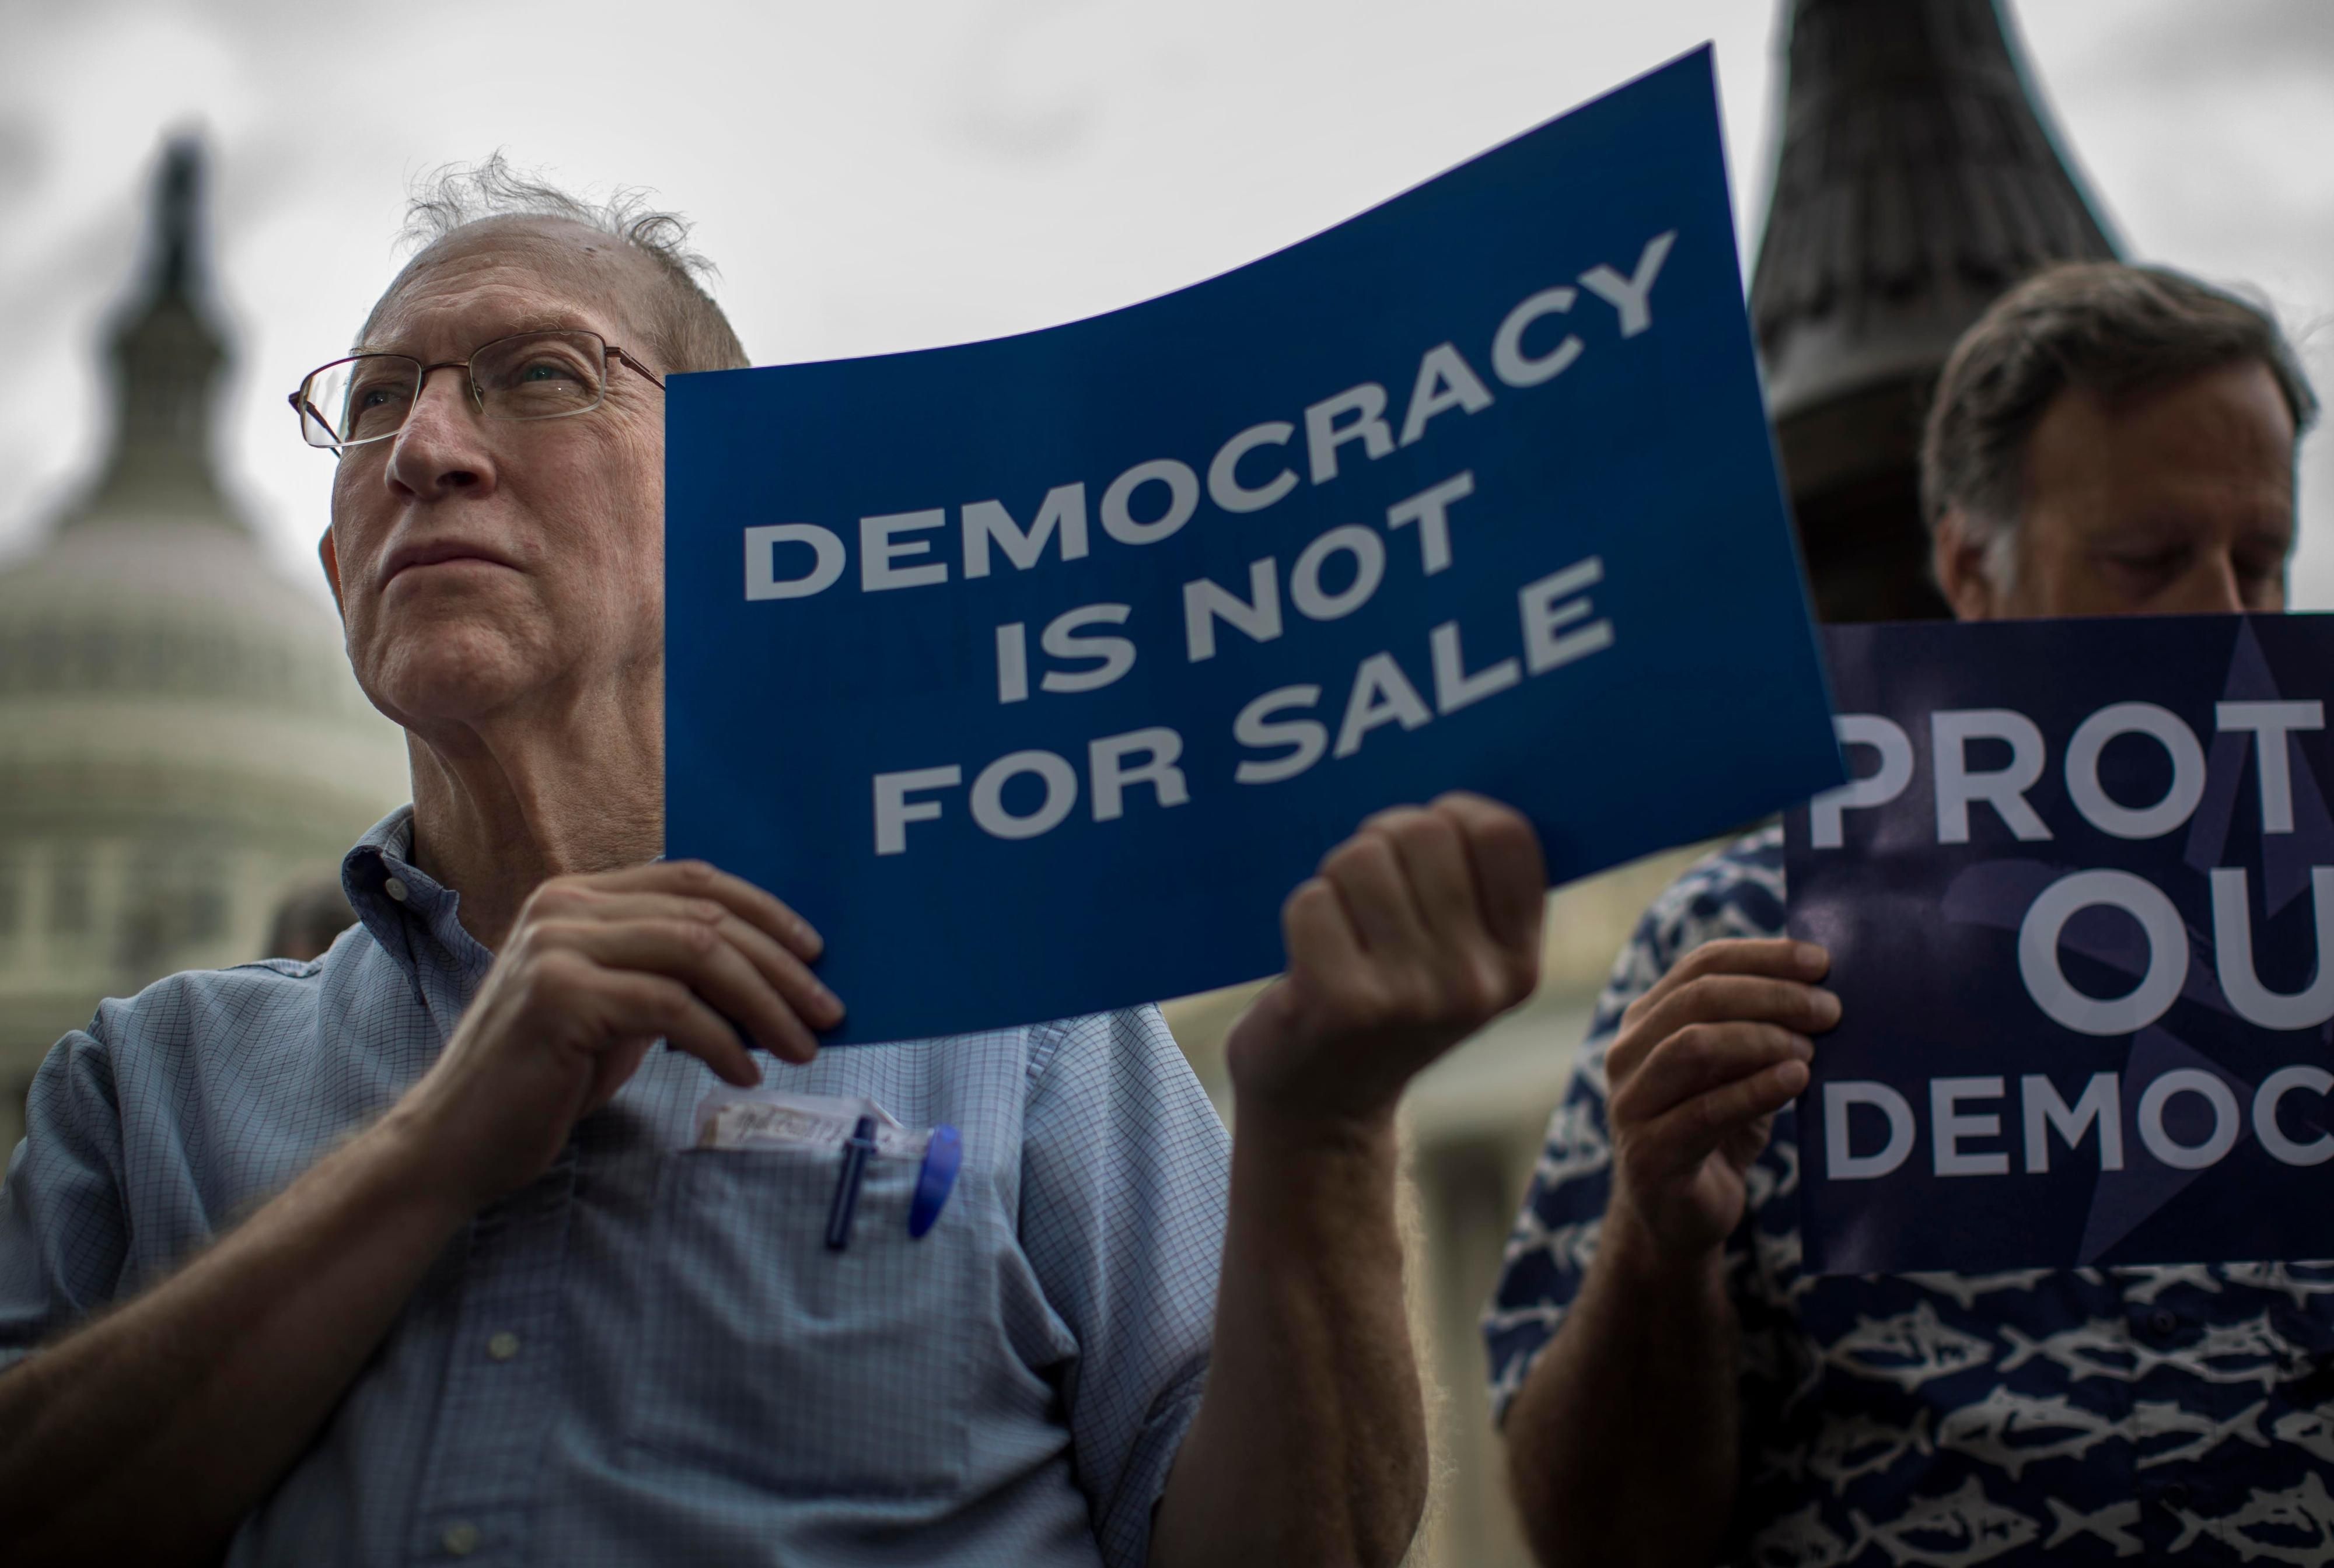 Man holding sign that says "Democracy Is Not for Sale"